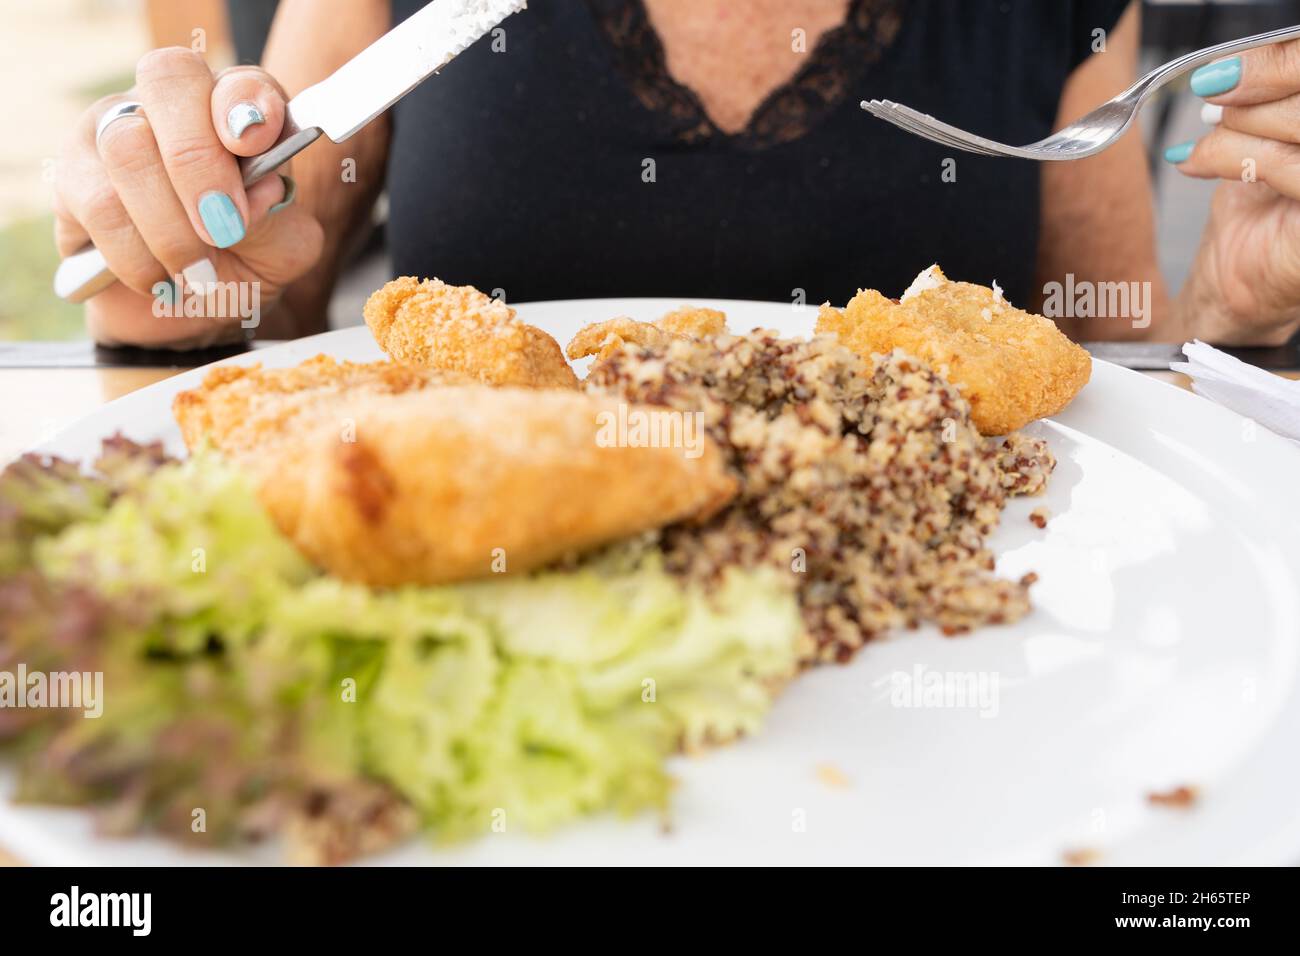 Woman Cleaning Silverware Stock Photo - Download Image Now